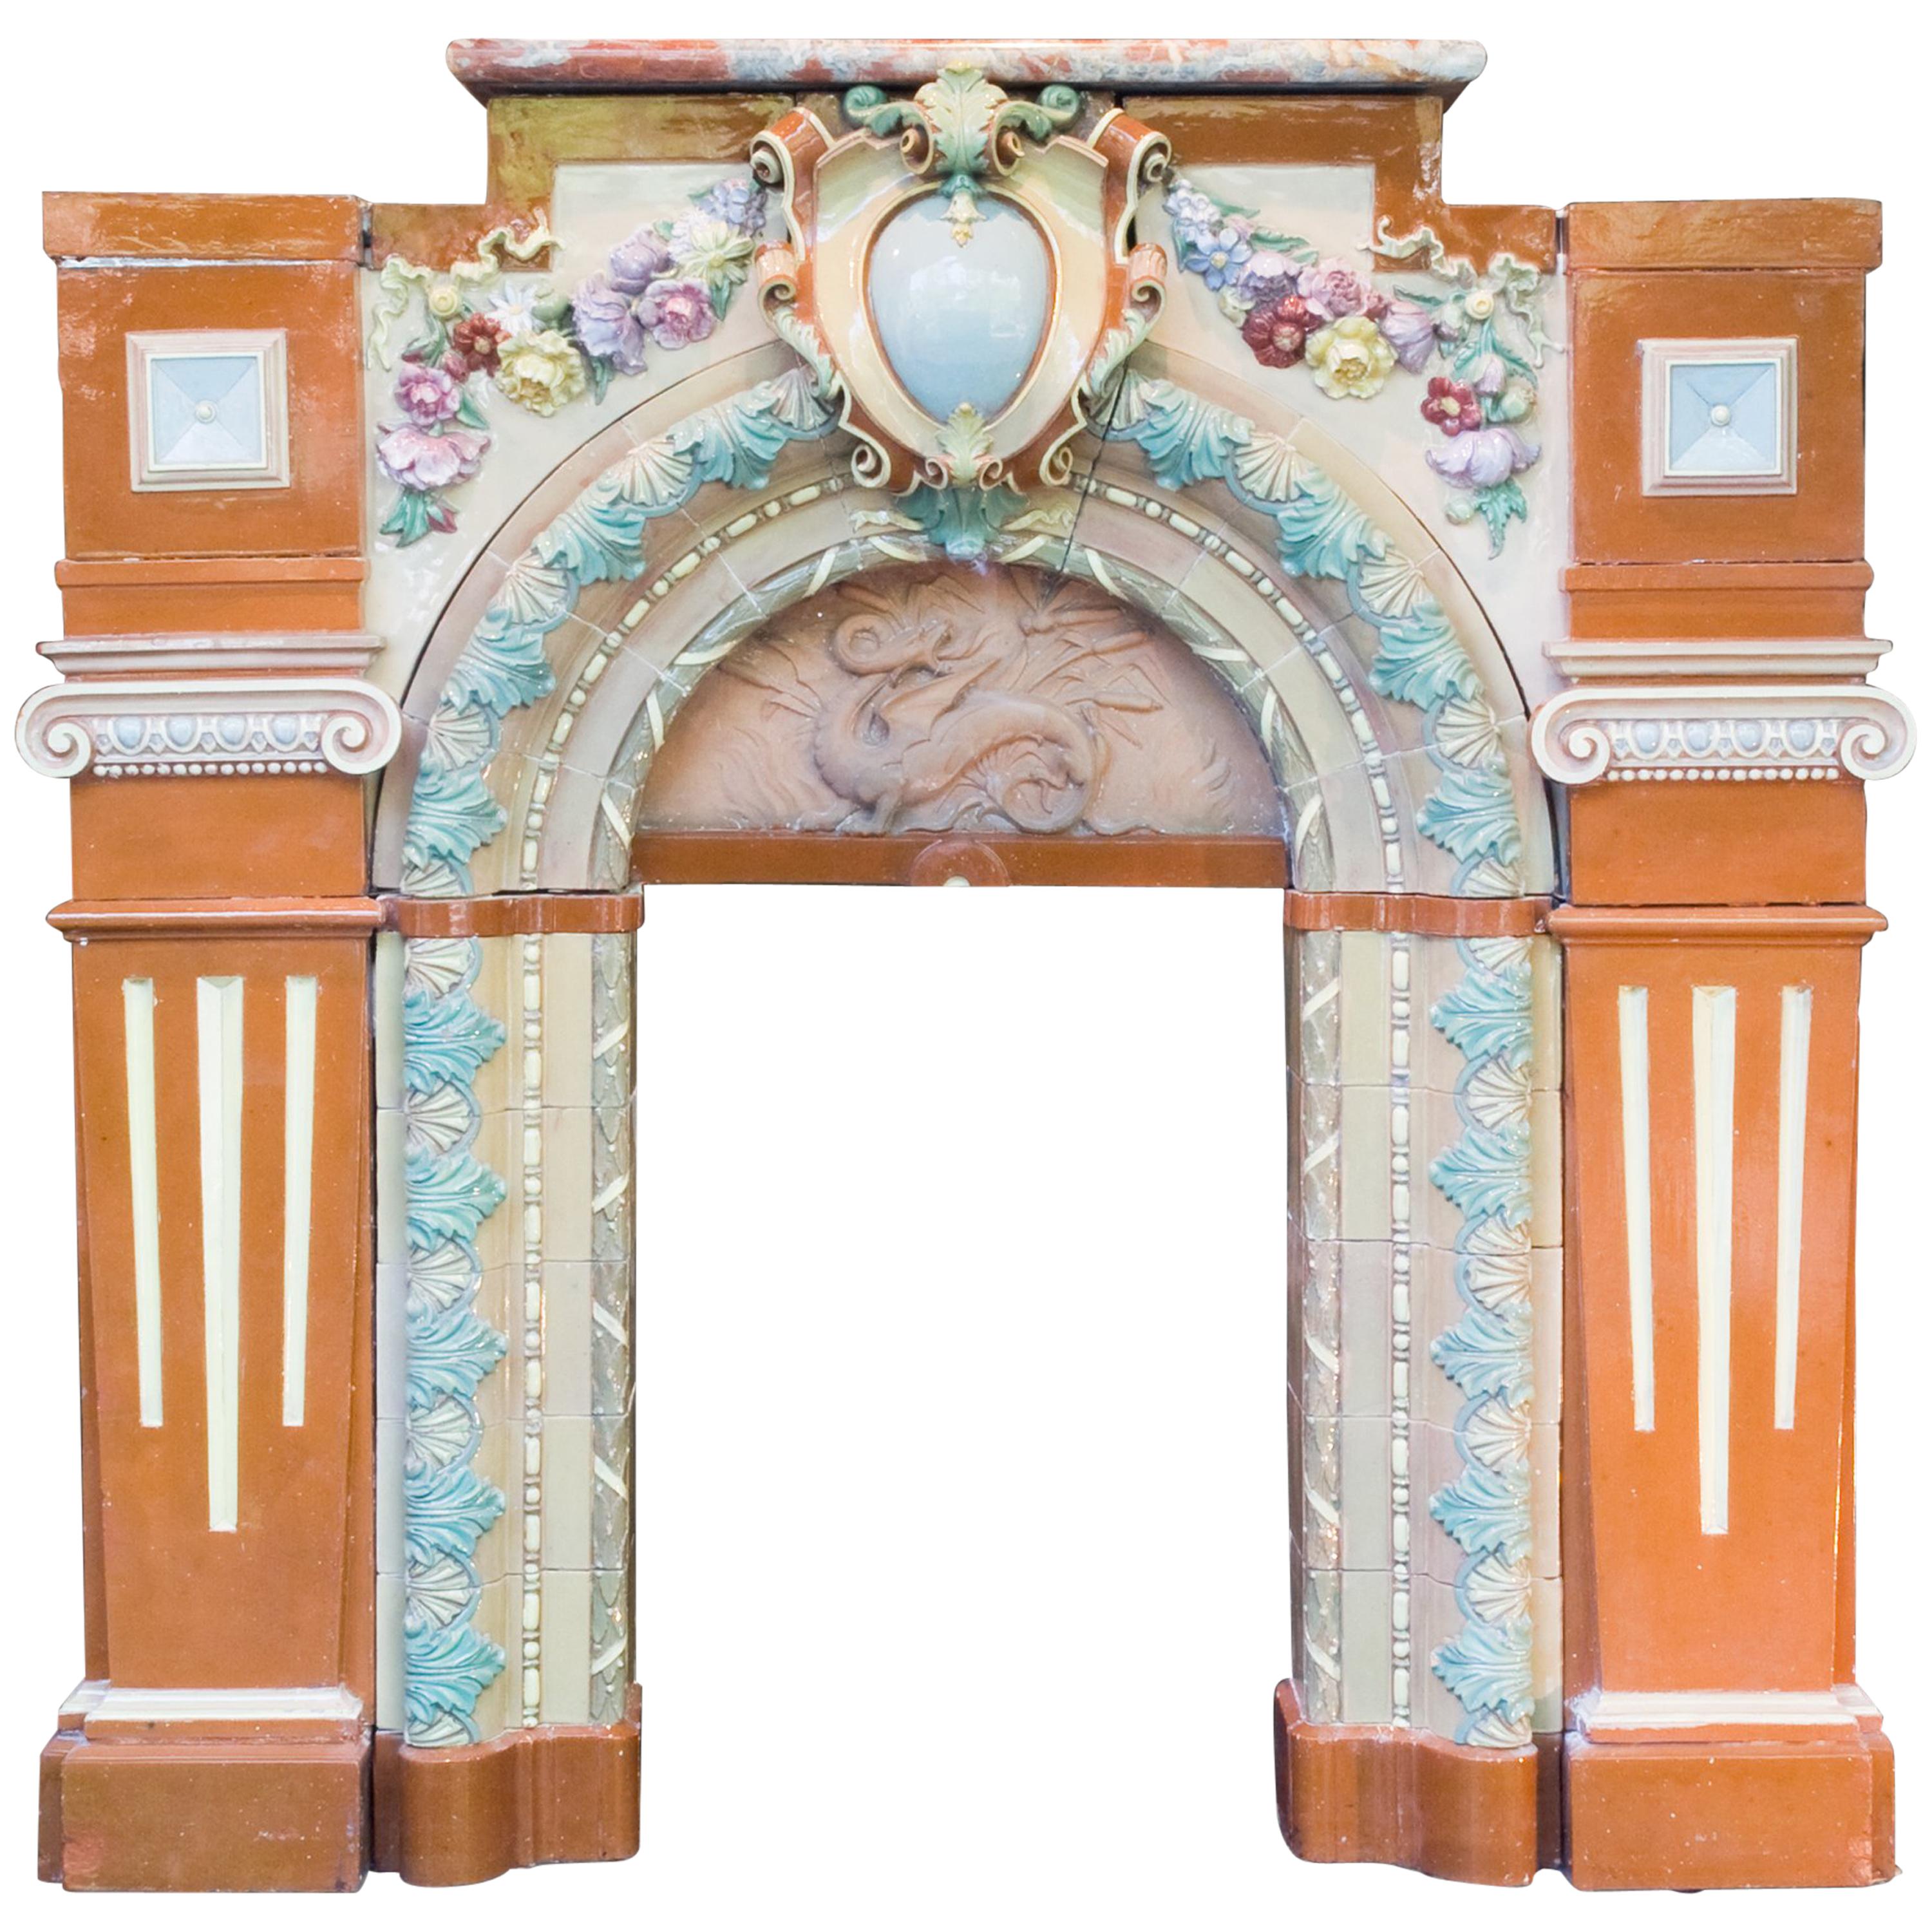 1910 Polychrome Earthenware and Terracotta Mantel For Sale